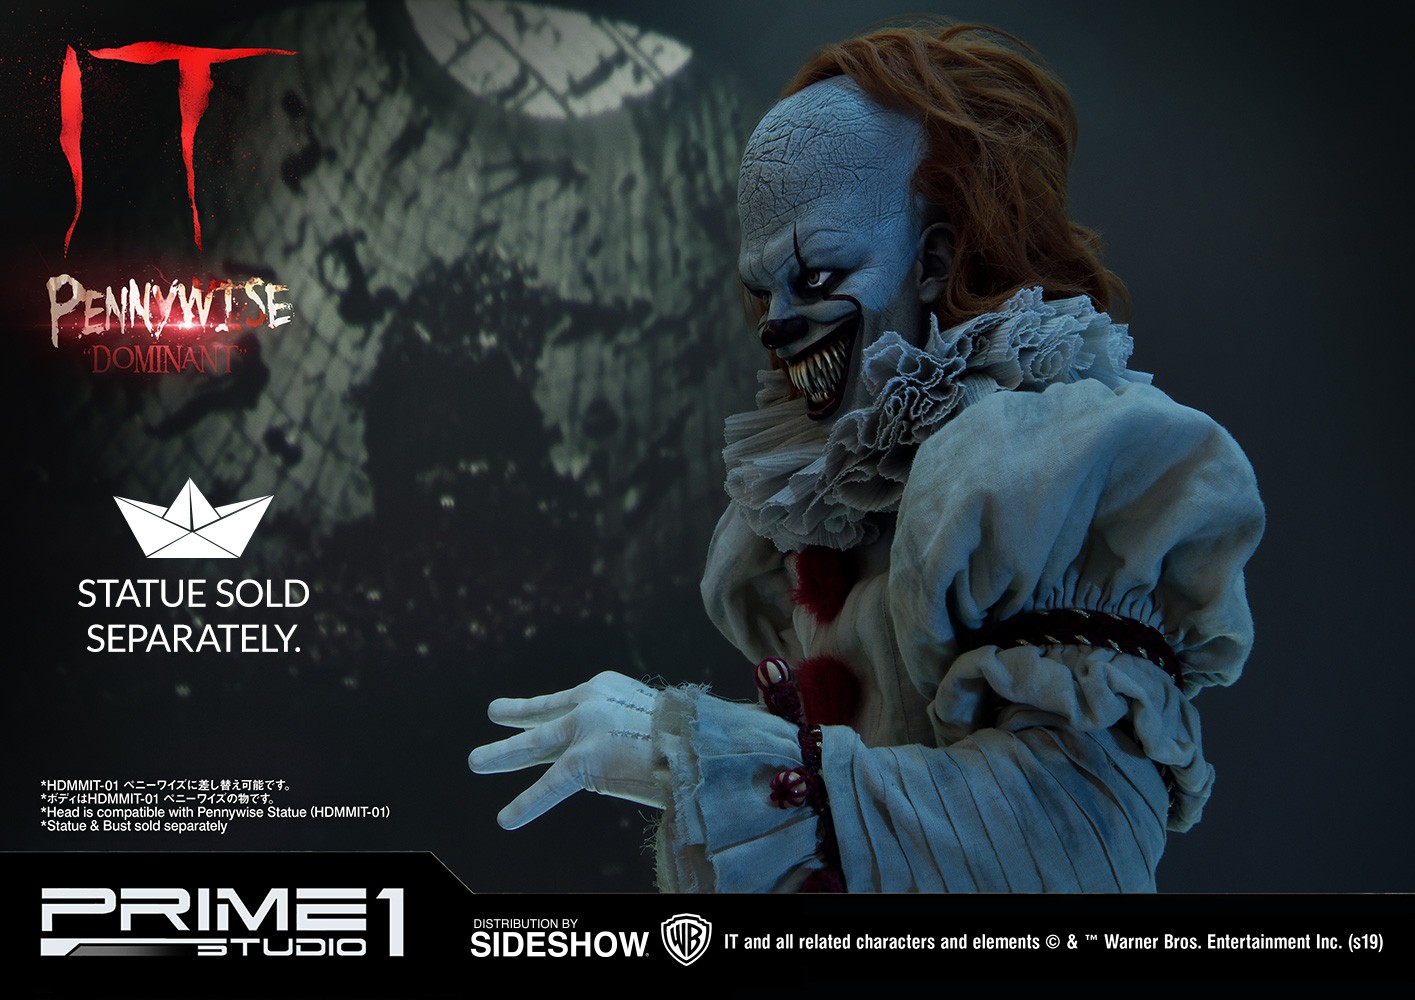 Pennywise Bust Set- Prototype Shown